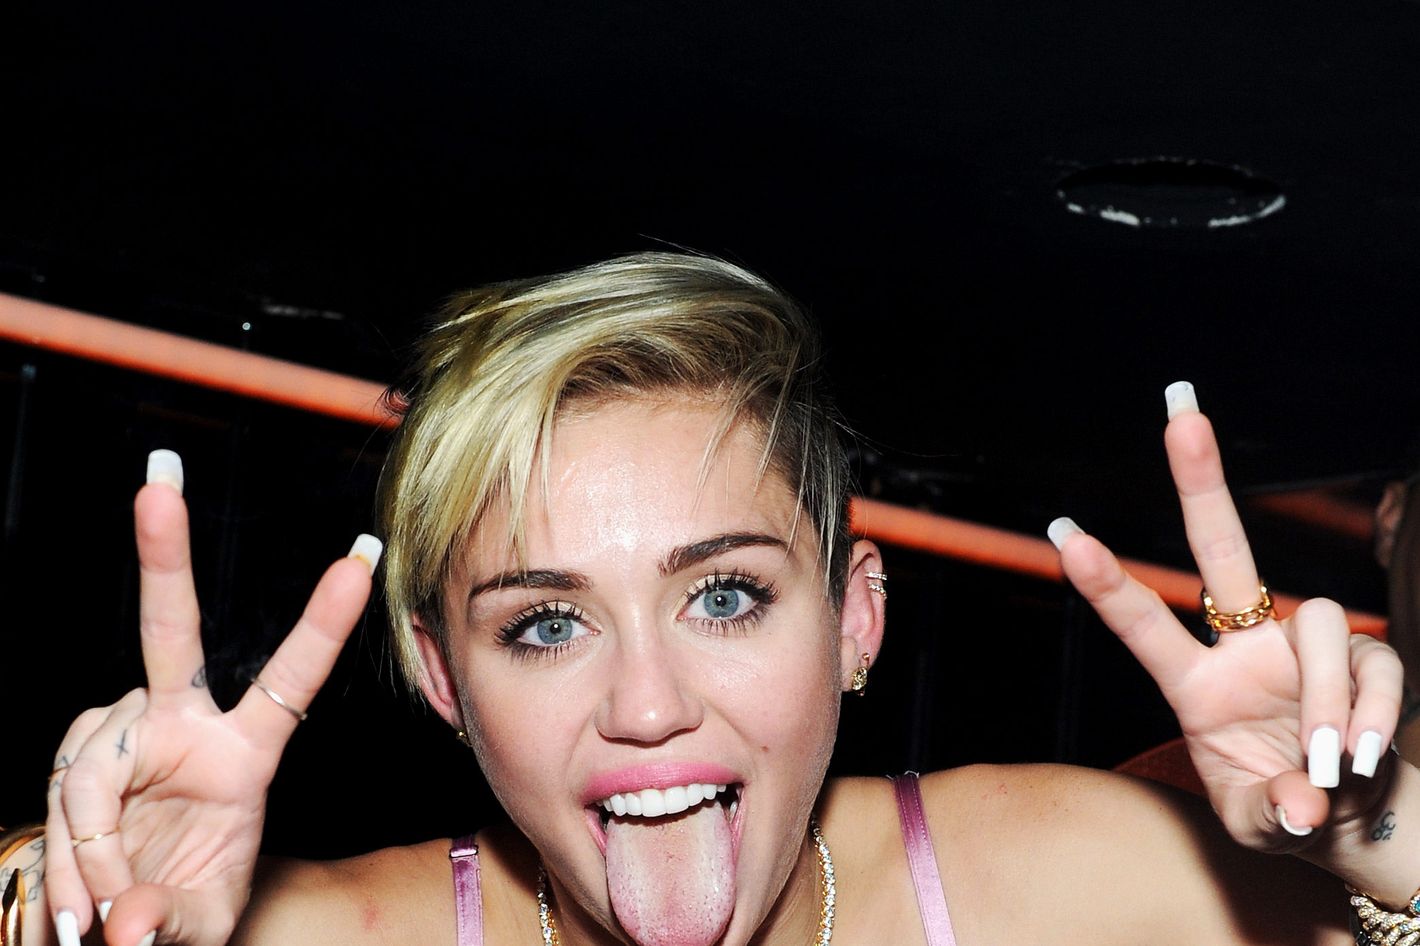 Miley Cyrus Real Porn - Miley Cyrus Was Offered $1 Million to Direct Porn and We Have No Choice But  to Write About It